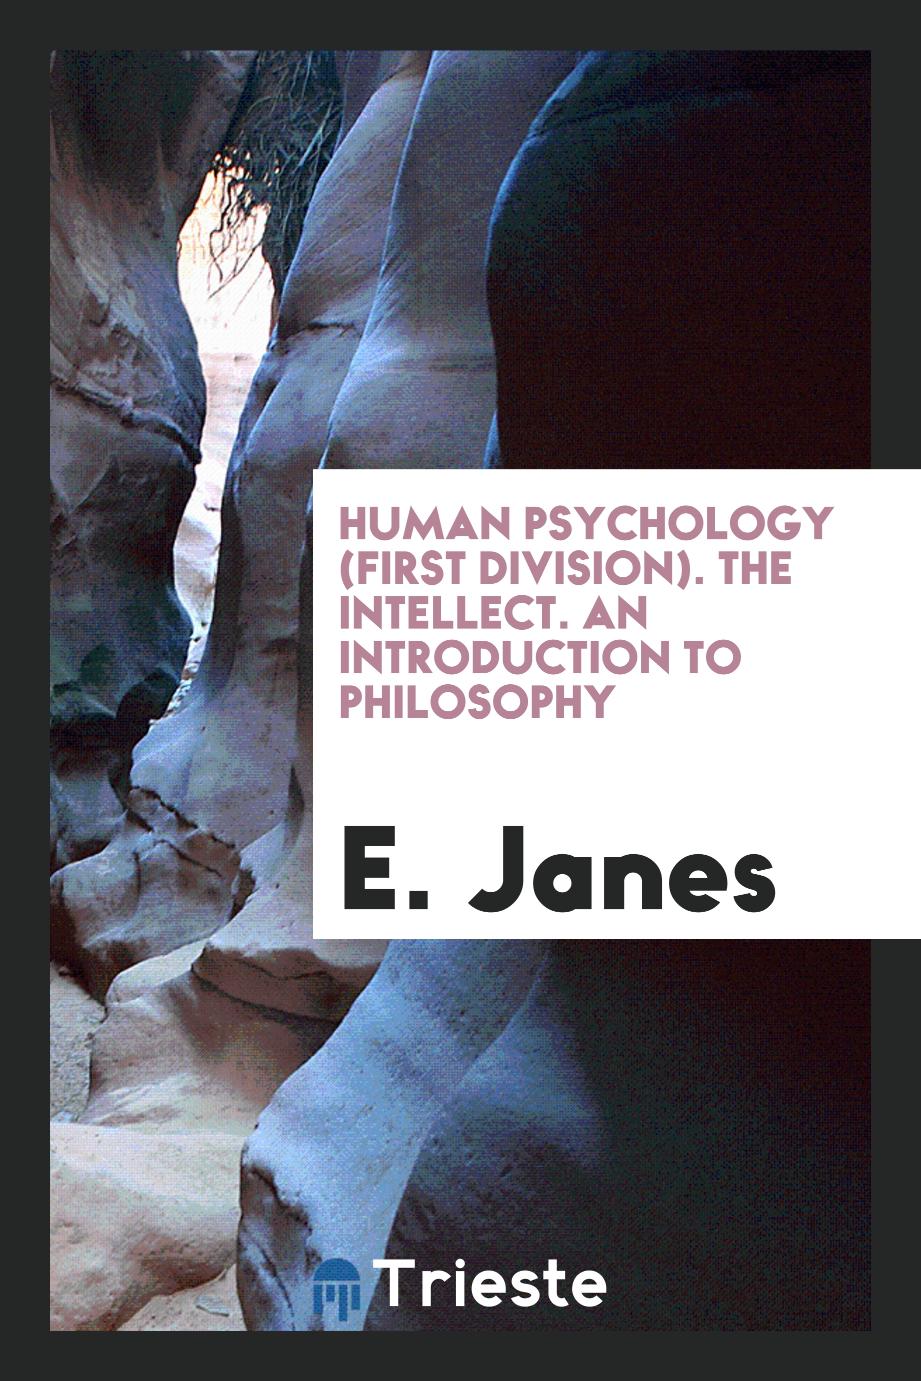 Human psychology (first division). The Intellect. An introduction to Philosophy